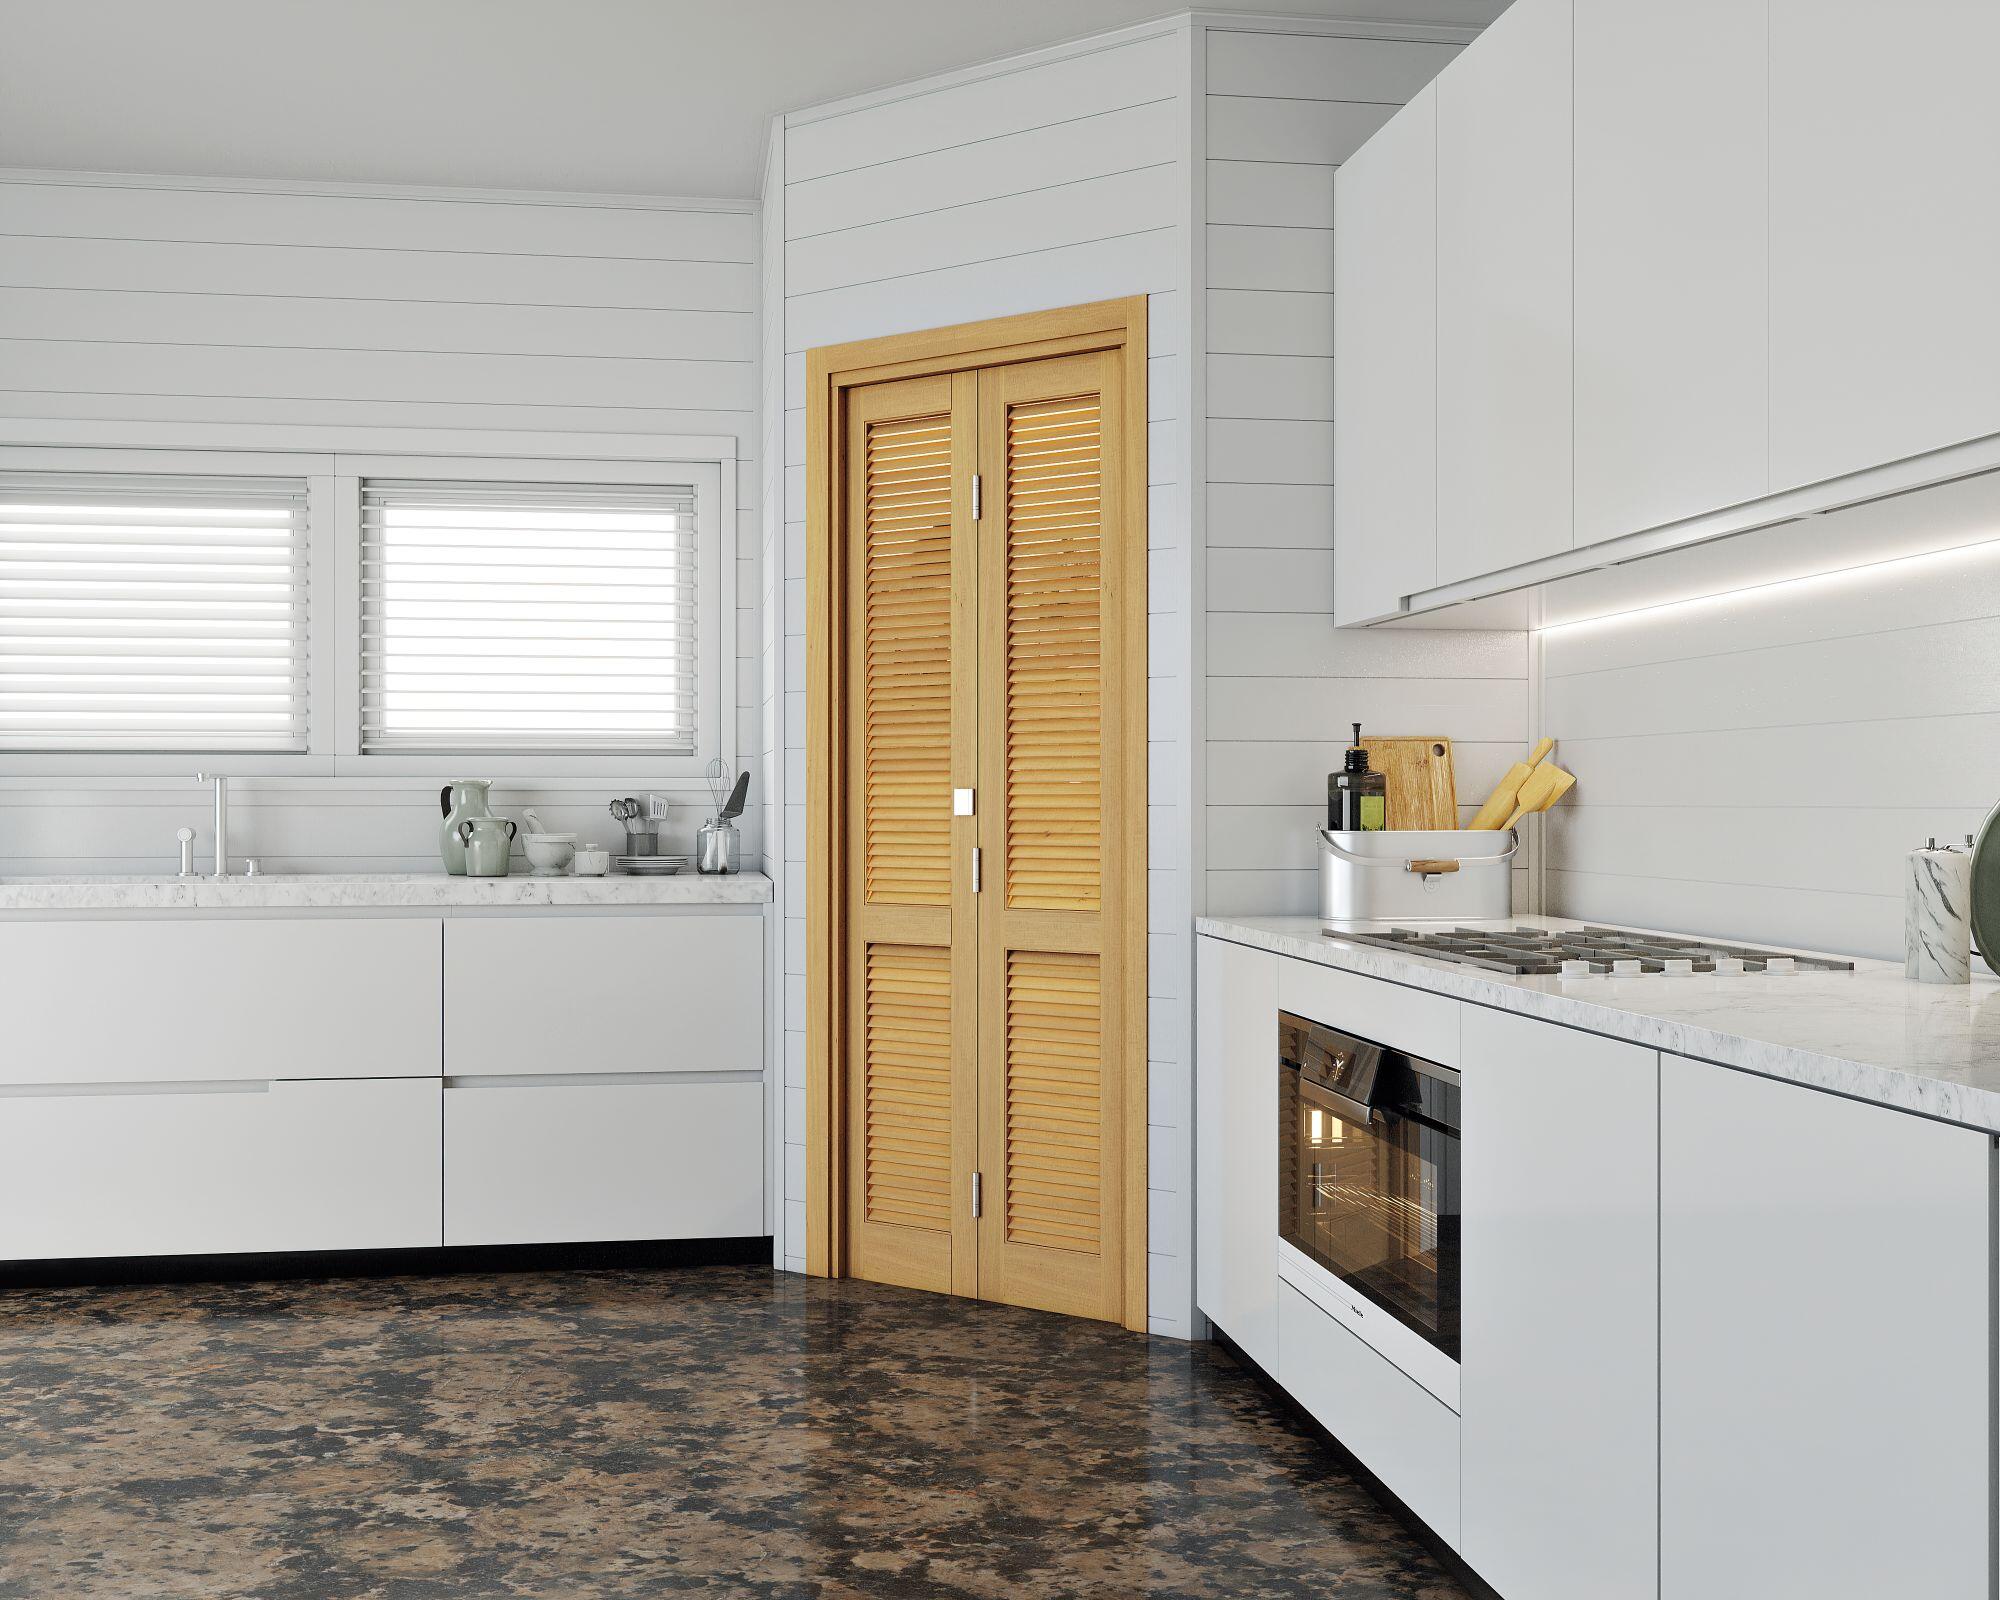 Doors Plus-Solid timber-Internal-Louvre Bifold Door-Stained Light Maple-Used for Kitchen Pantry - Door Closed